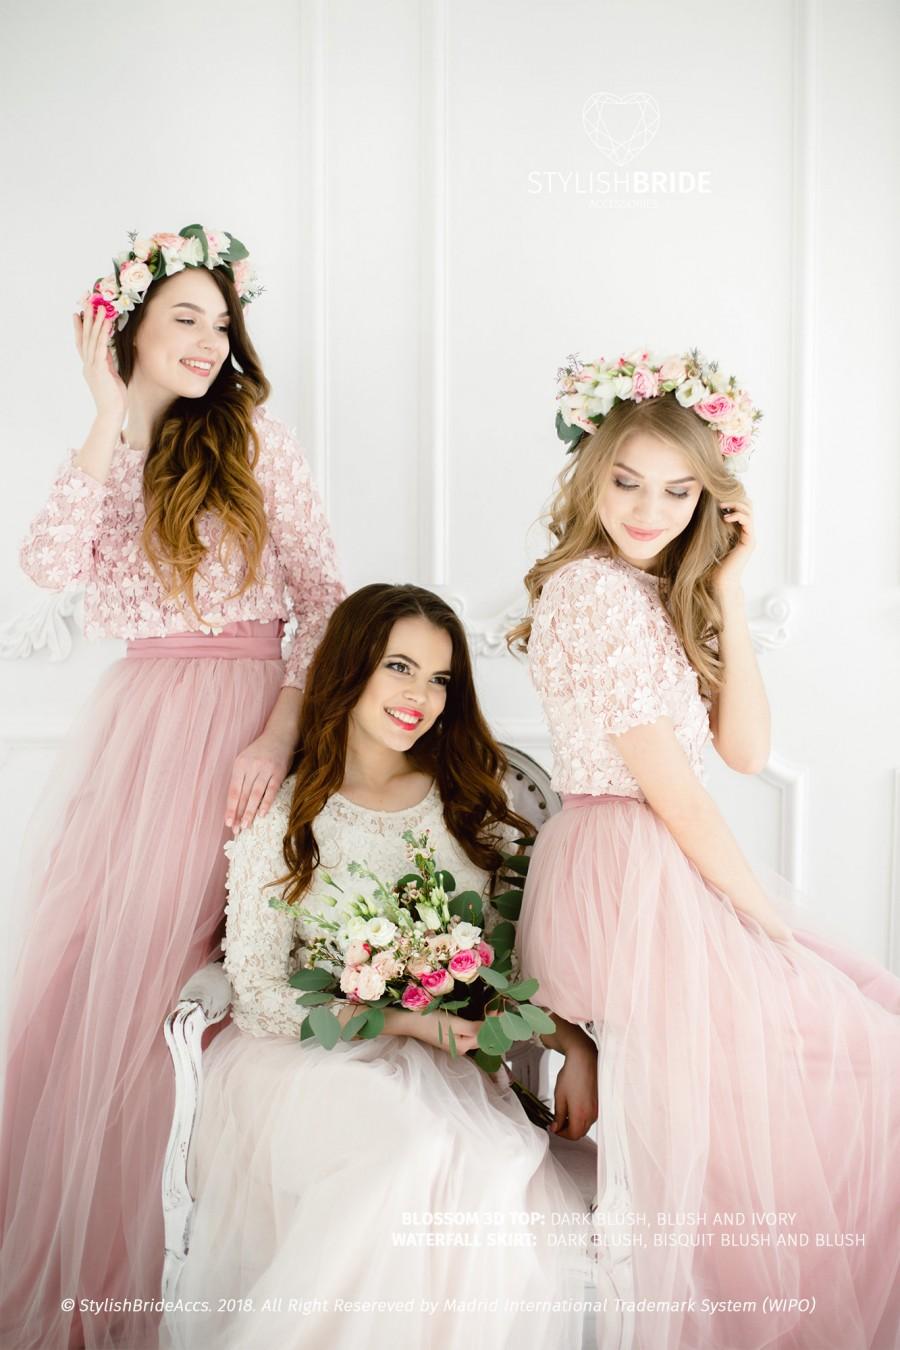 Wedding - Blossom Lace Dress, Top and Tulle Skirt in Blush Ivory color, Bridesmaids blossom from 3dlace, Blush Prom Dresses Plus Size, Engagement top